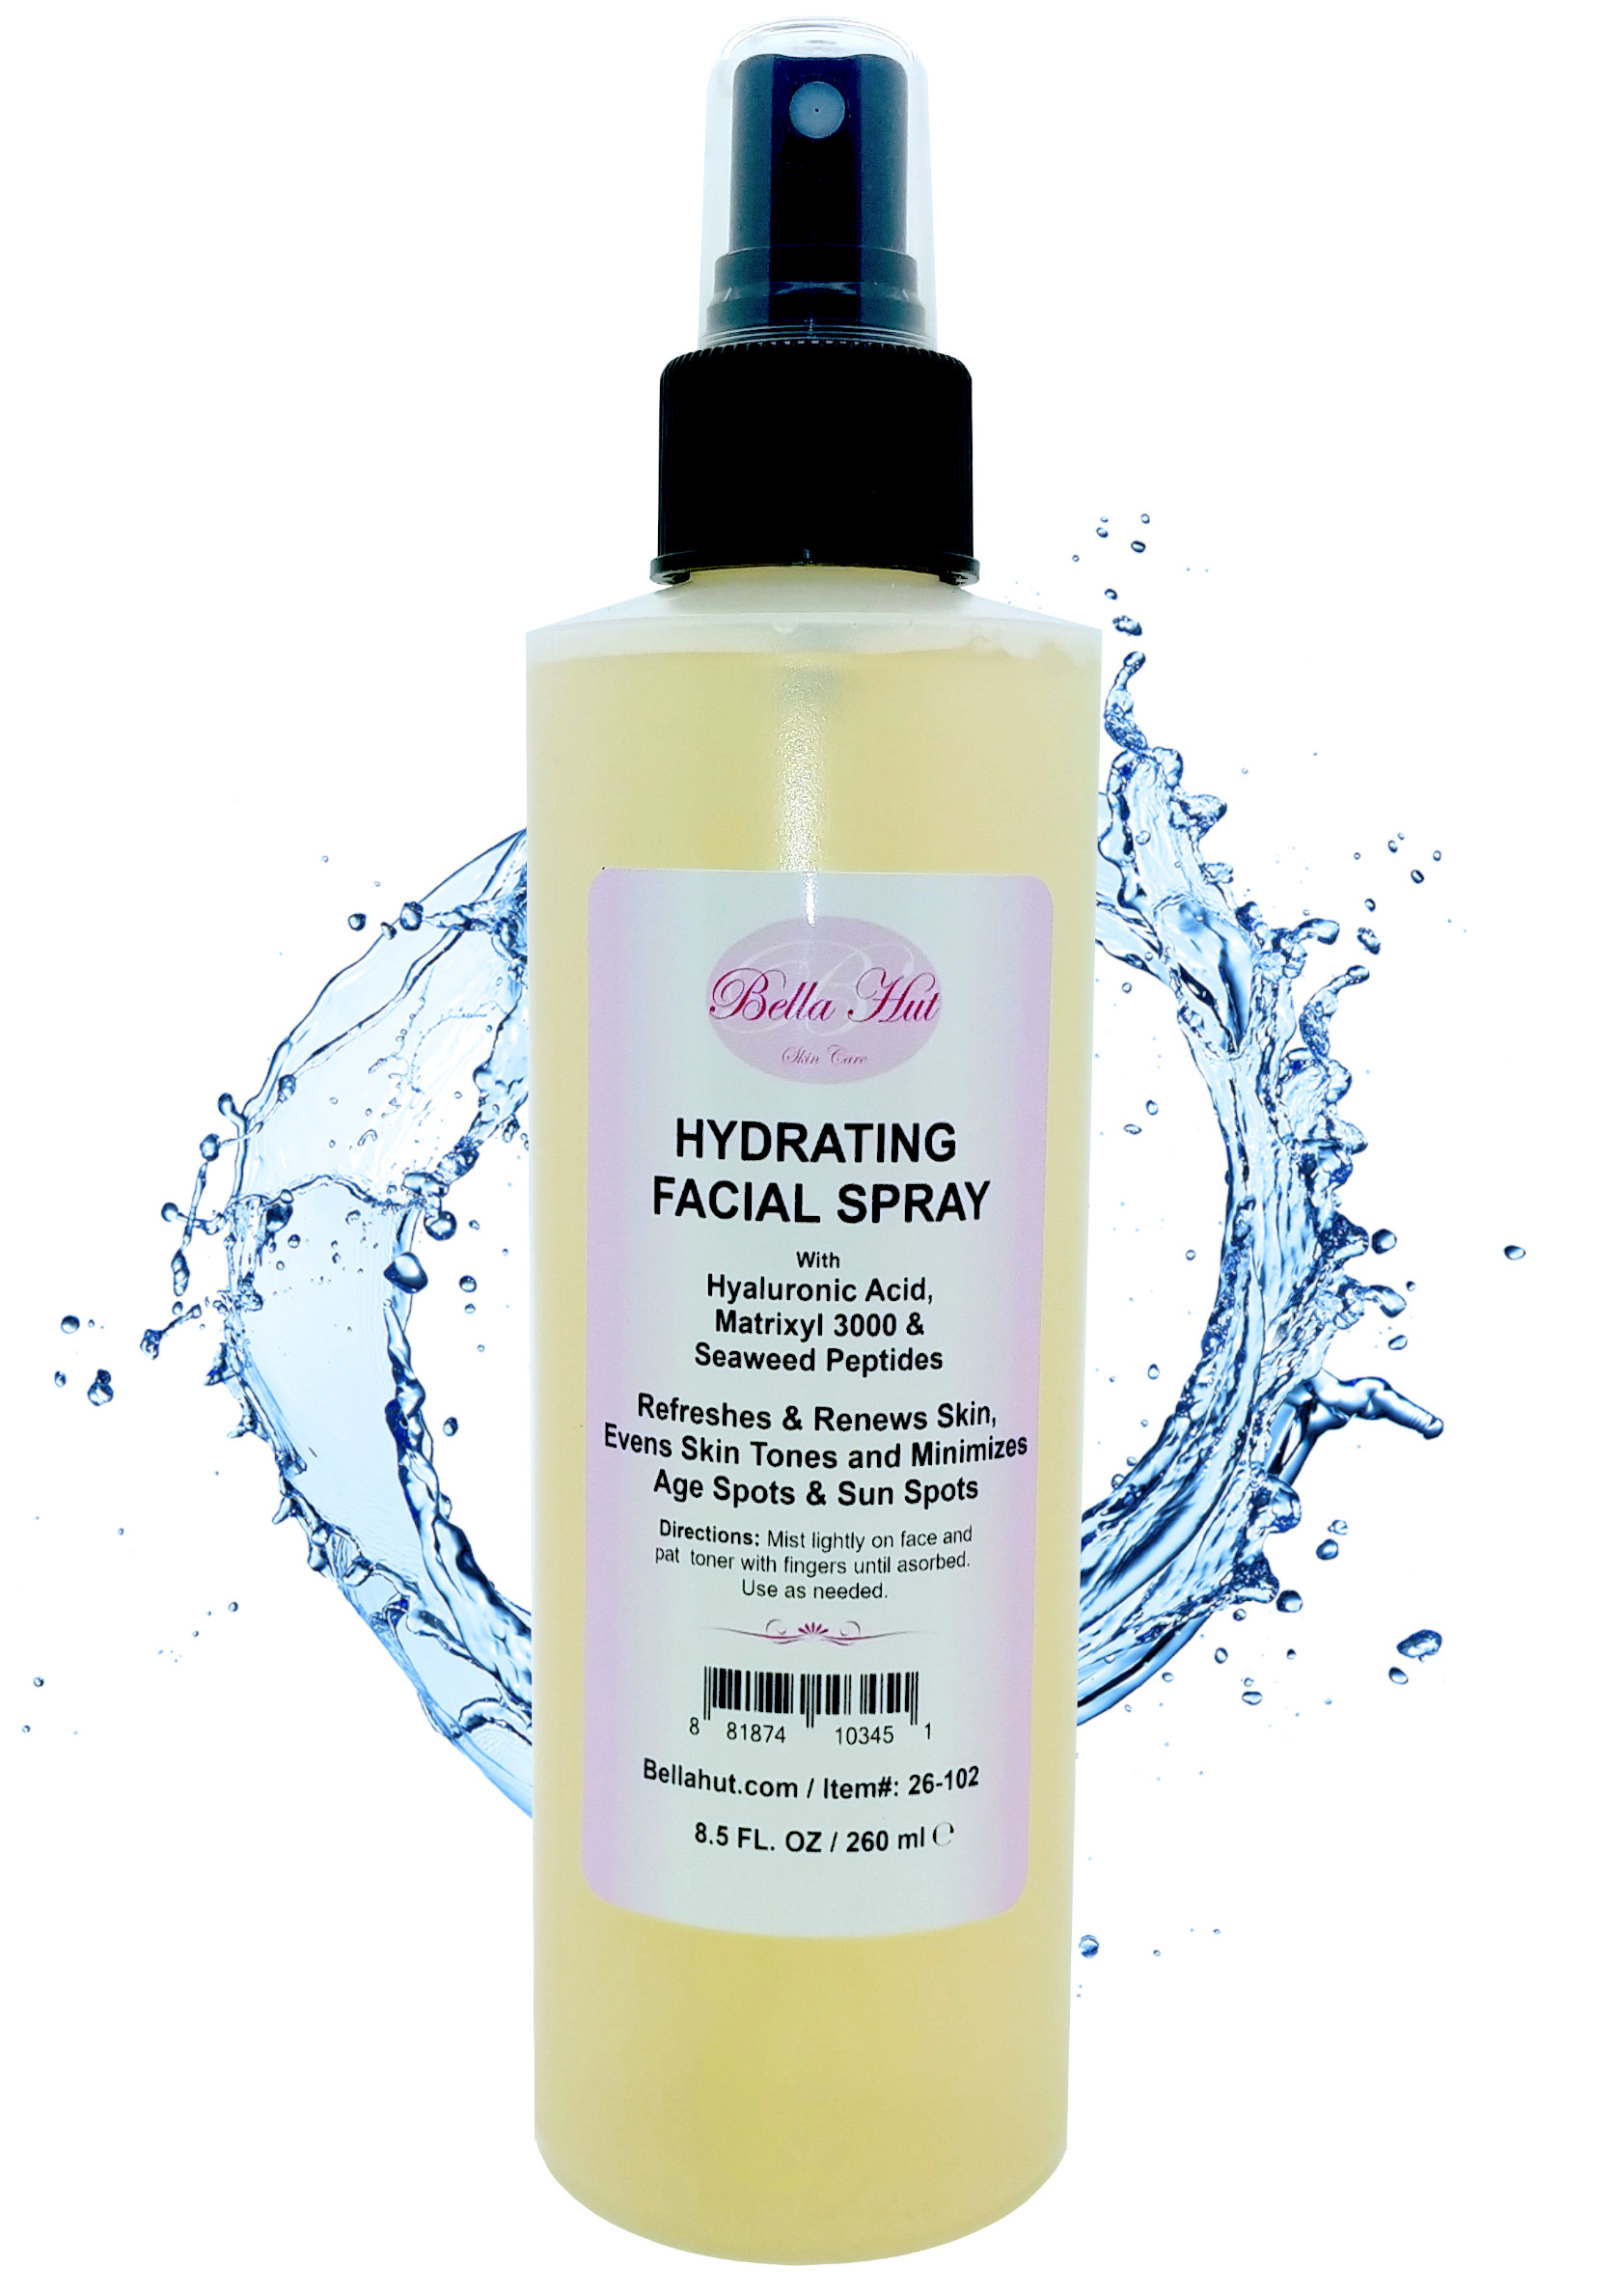 Hydrating Facial Spray with Hyaluronic Acid Matrixyl 3000 And Seaweed Extract that refeshes the skin and hydrates